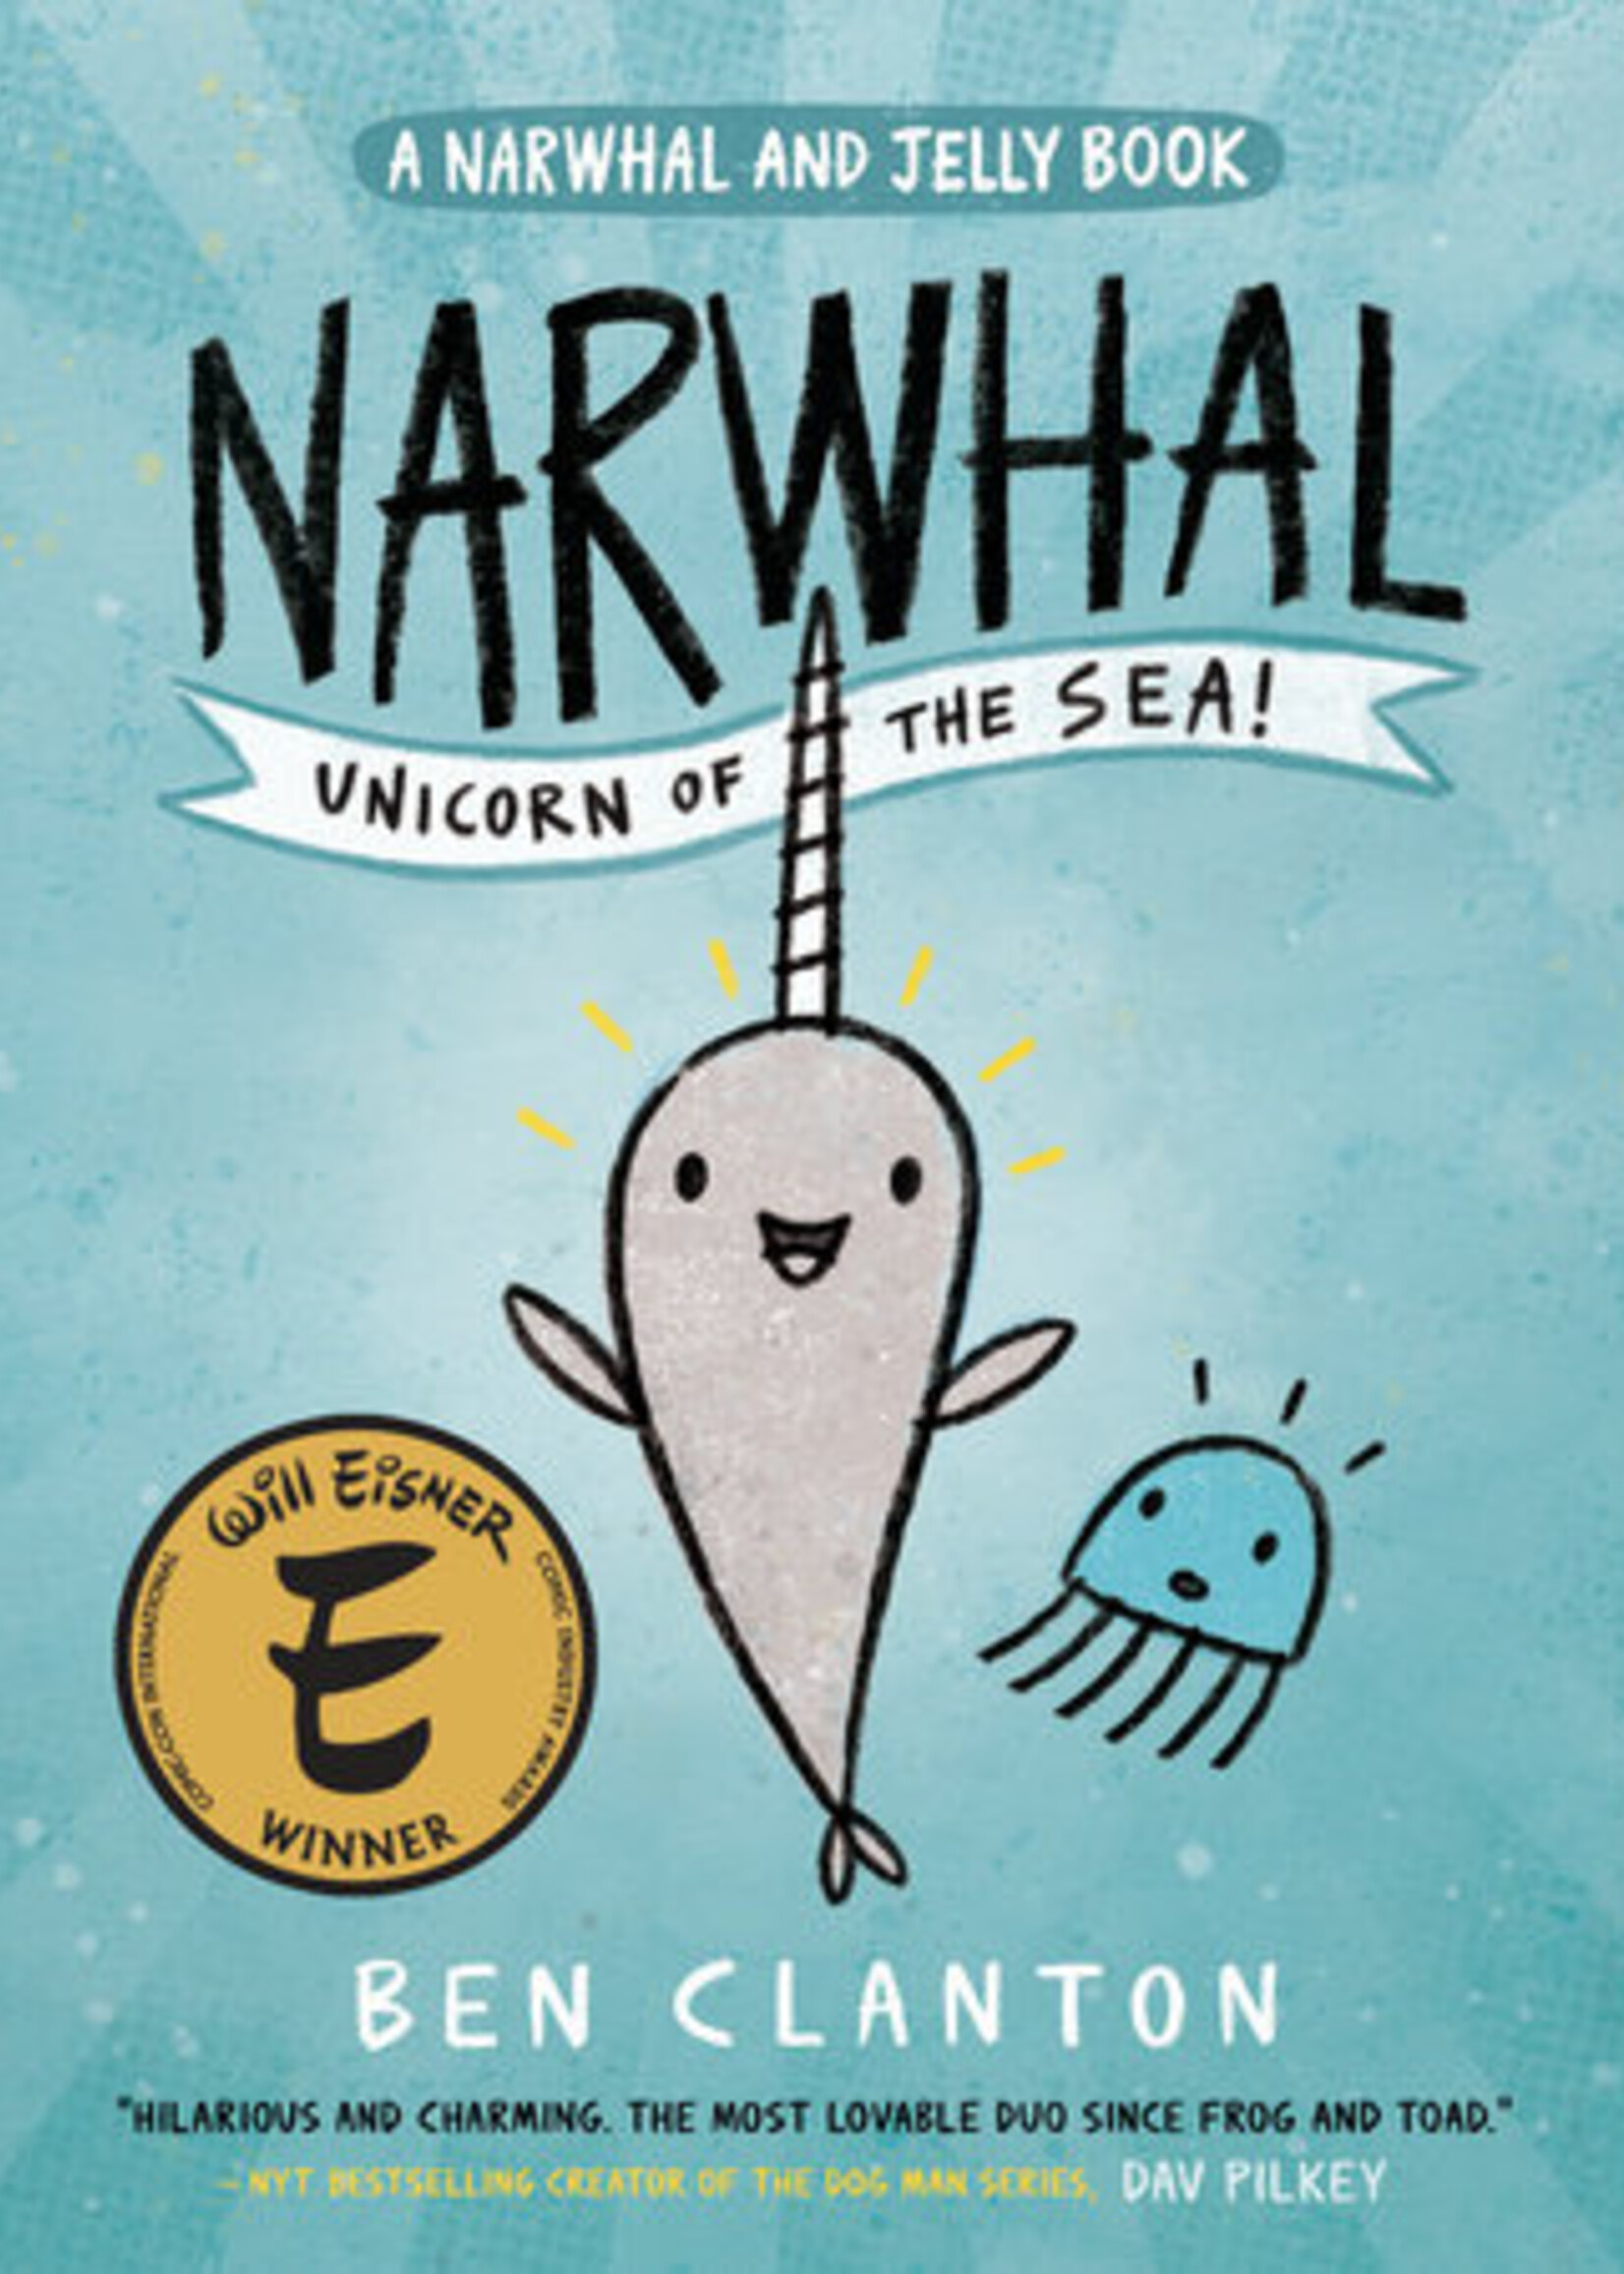 Narwhal, Unicorn of the Sea (Narwhal & Jelly #1)